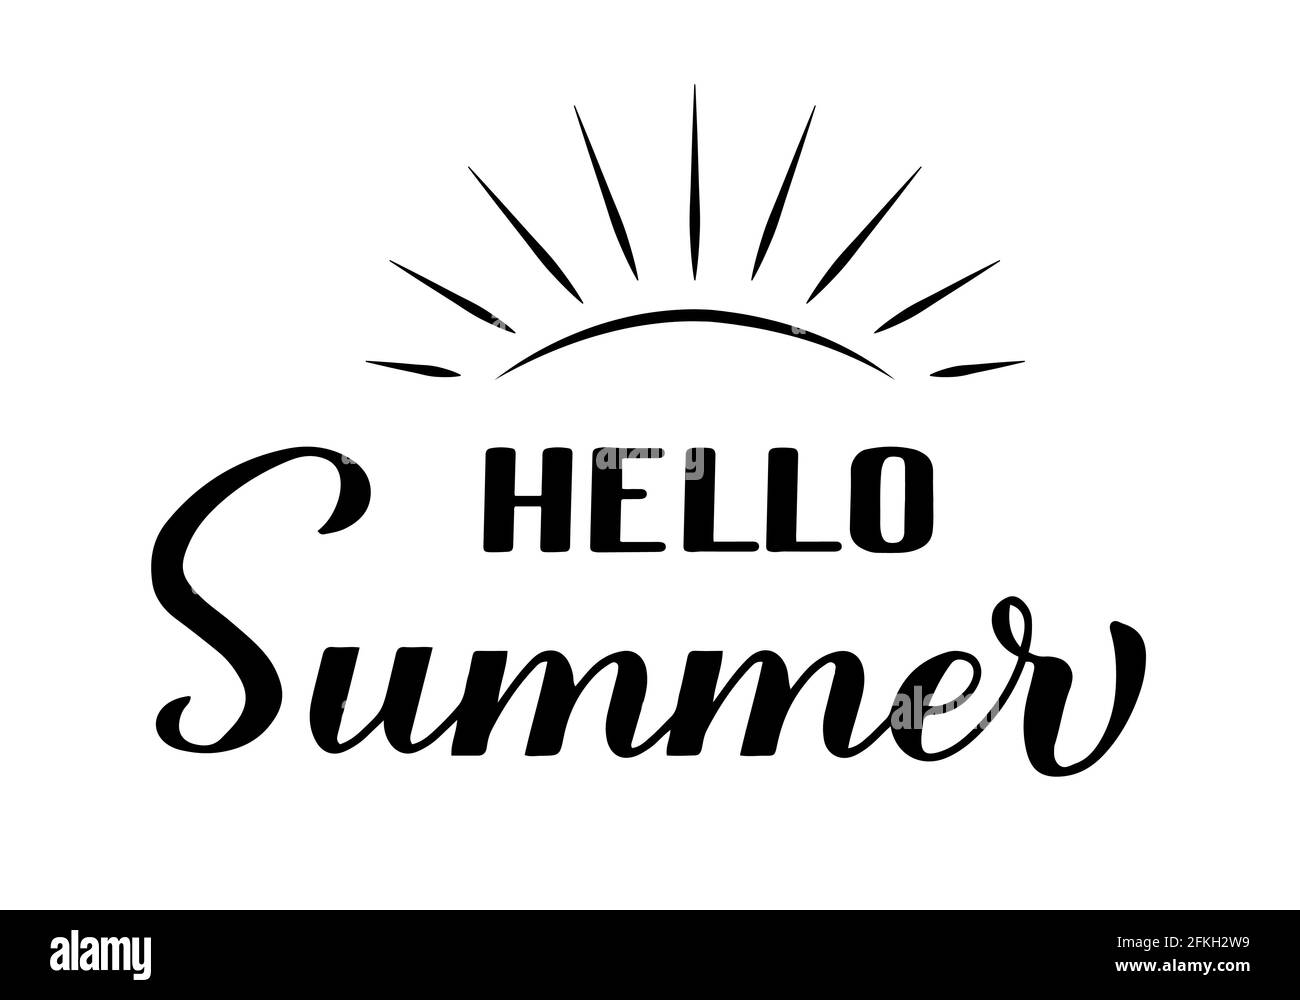 Hello summer calligraphy lettering isolated on white. Inspirational ...